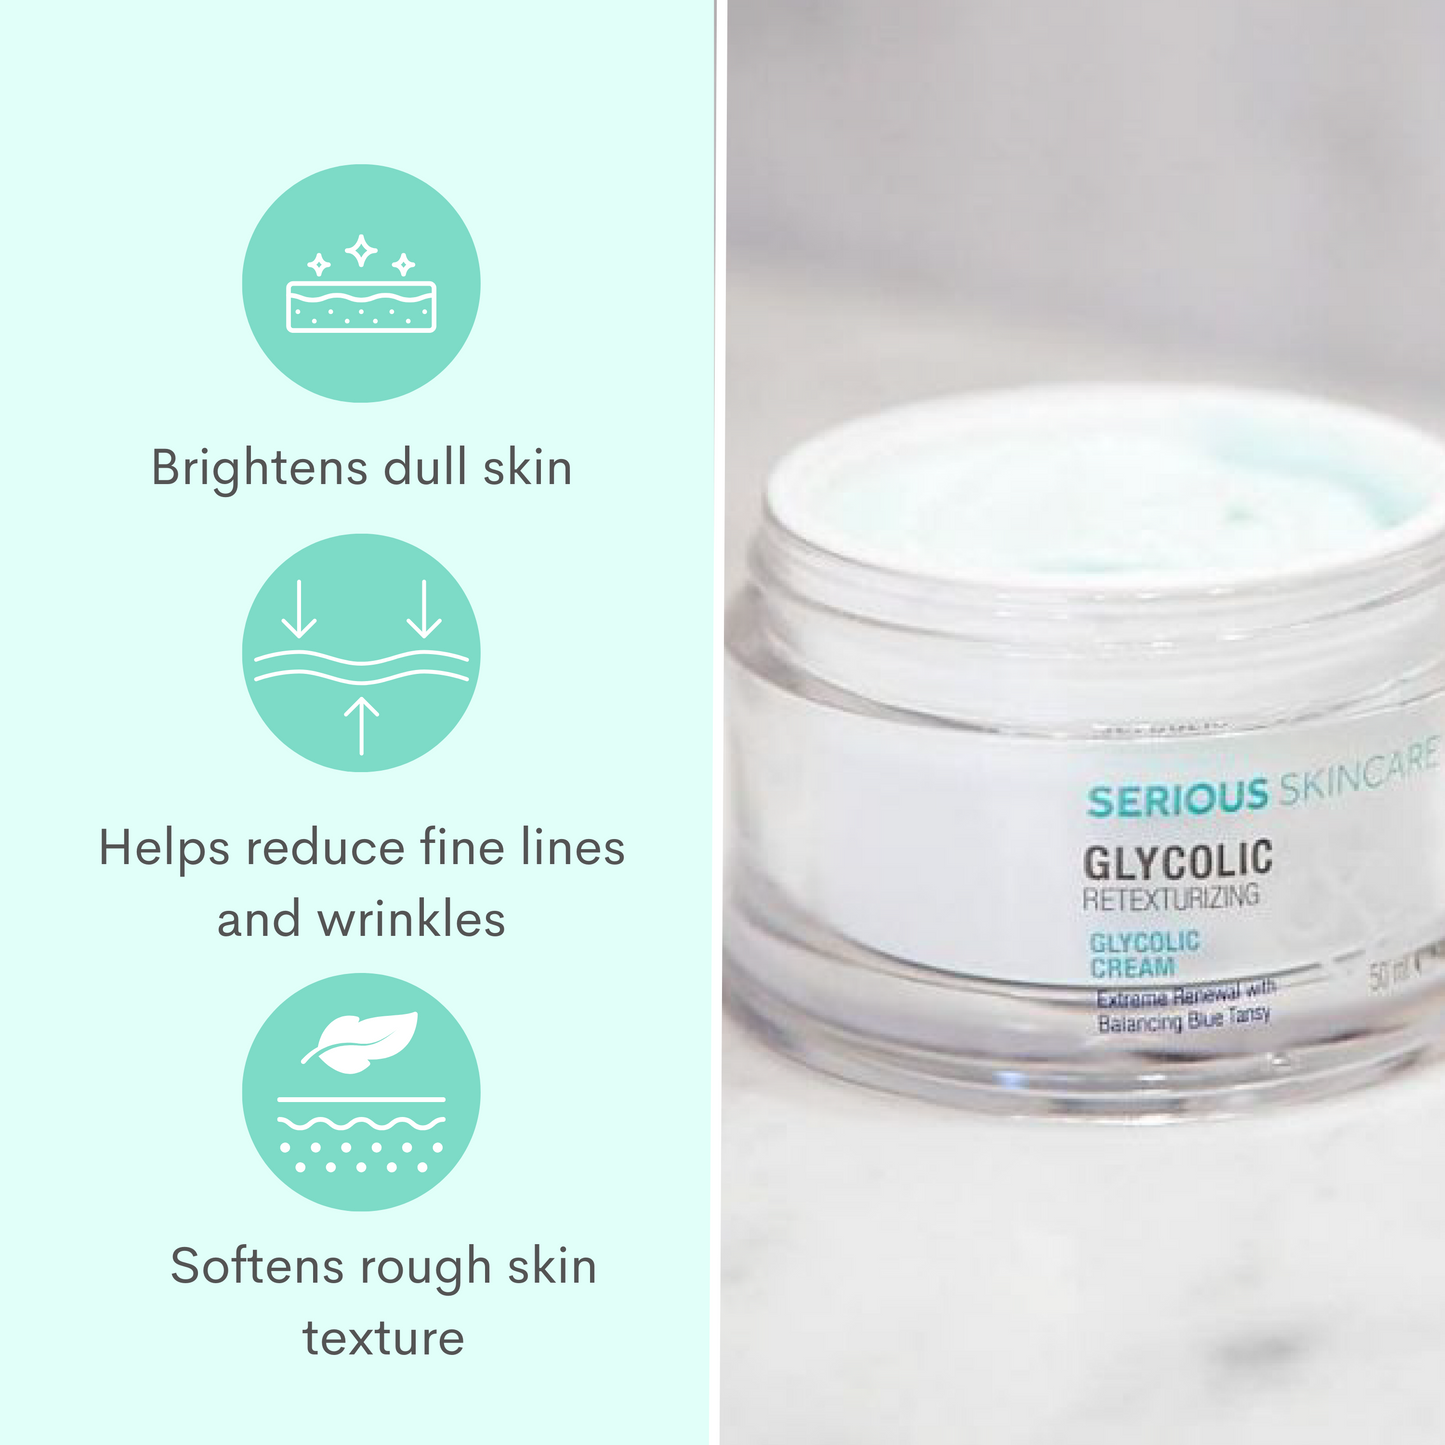 Glycolic facial cream by Serious Skincare